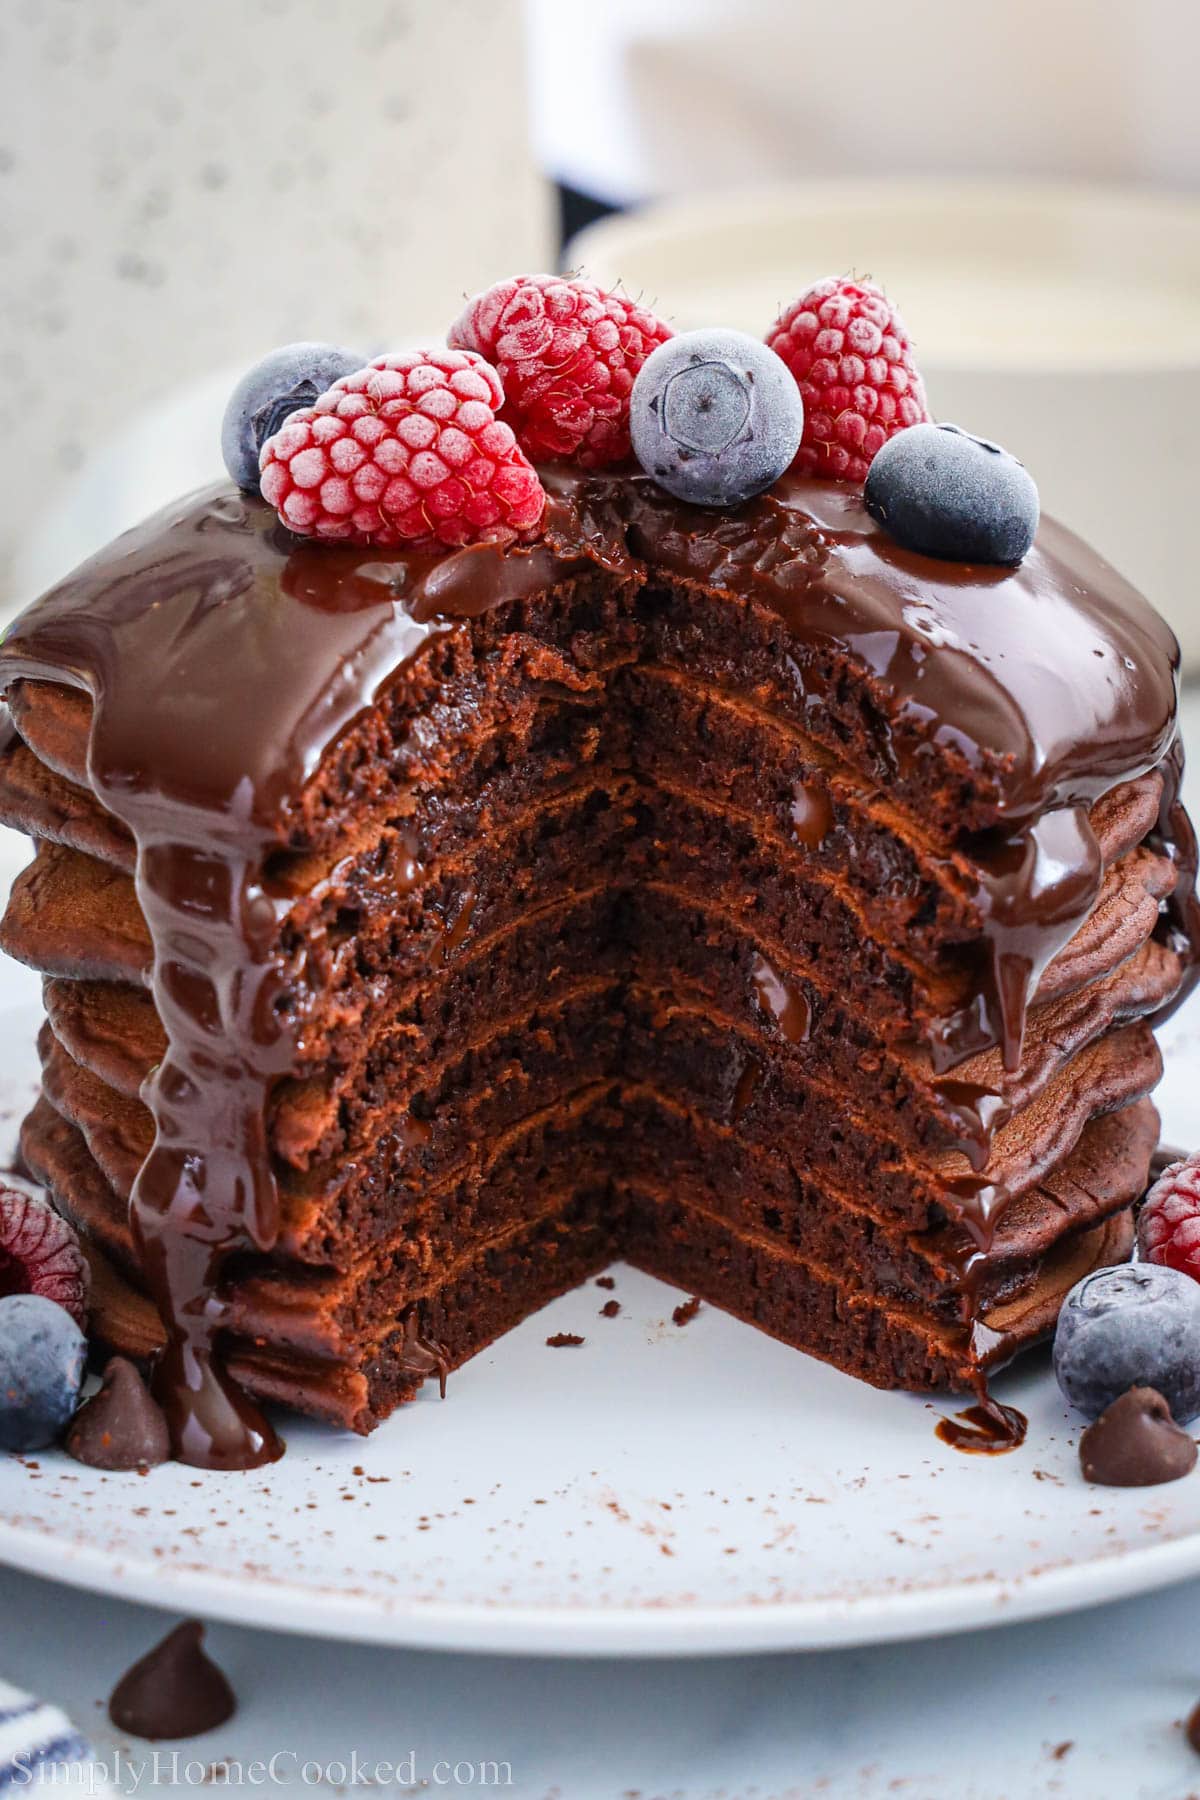 Stack of Chocolate Pancakes topped with chocolate ganache and berries, a piece missing.